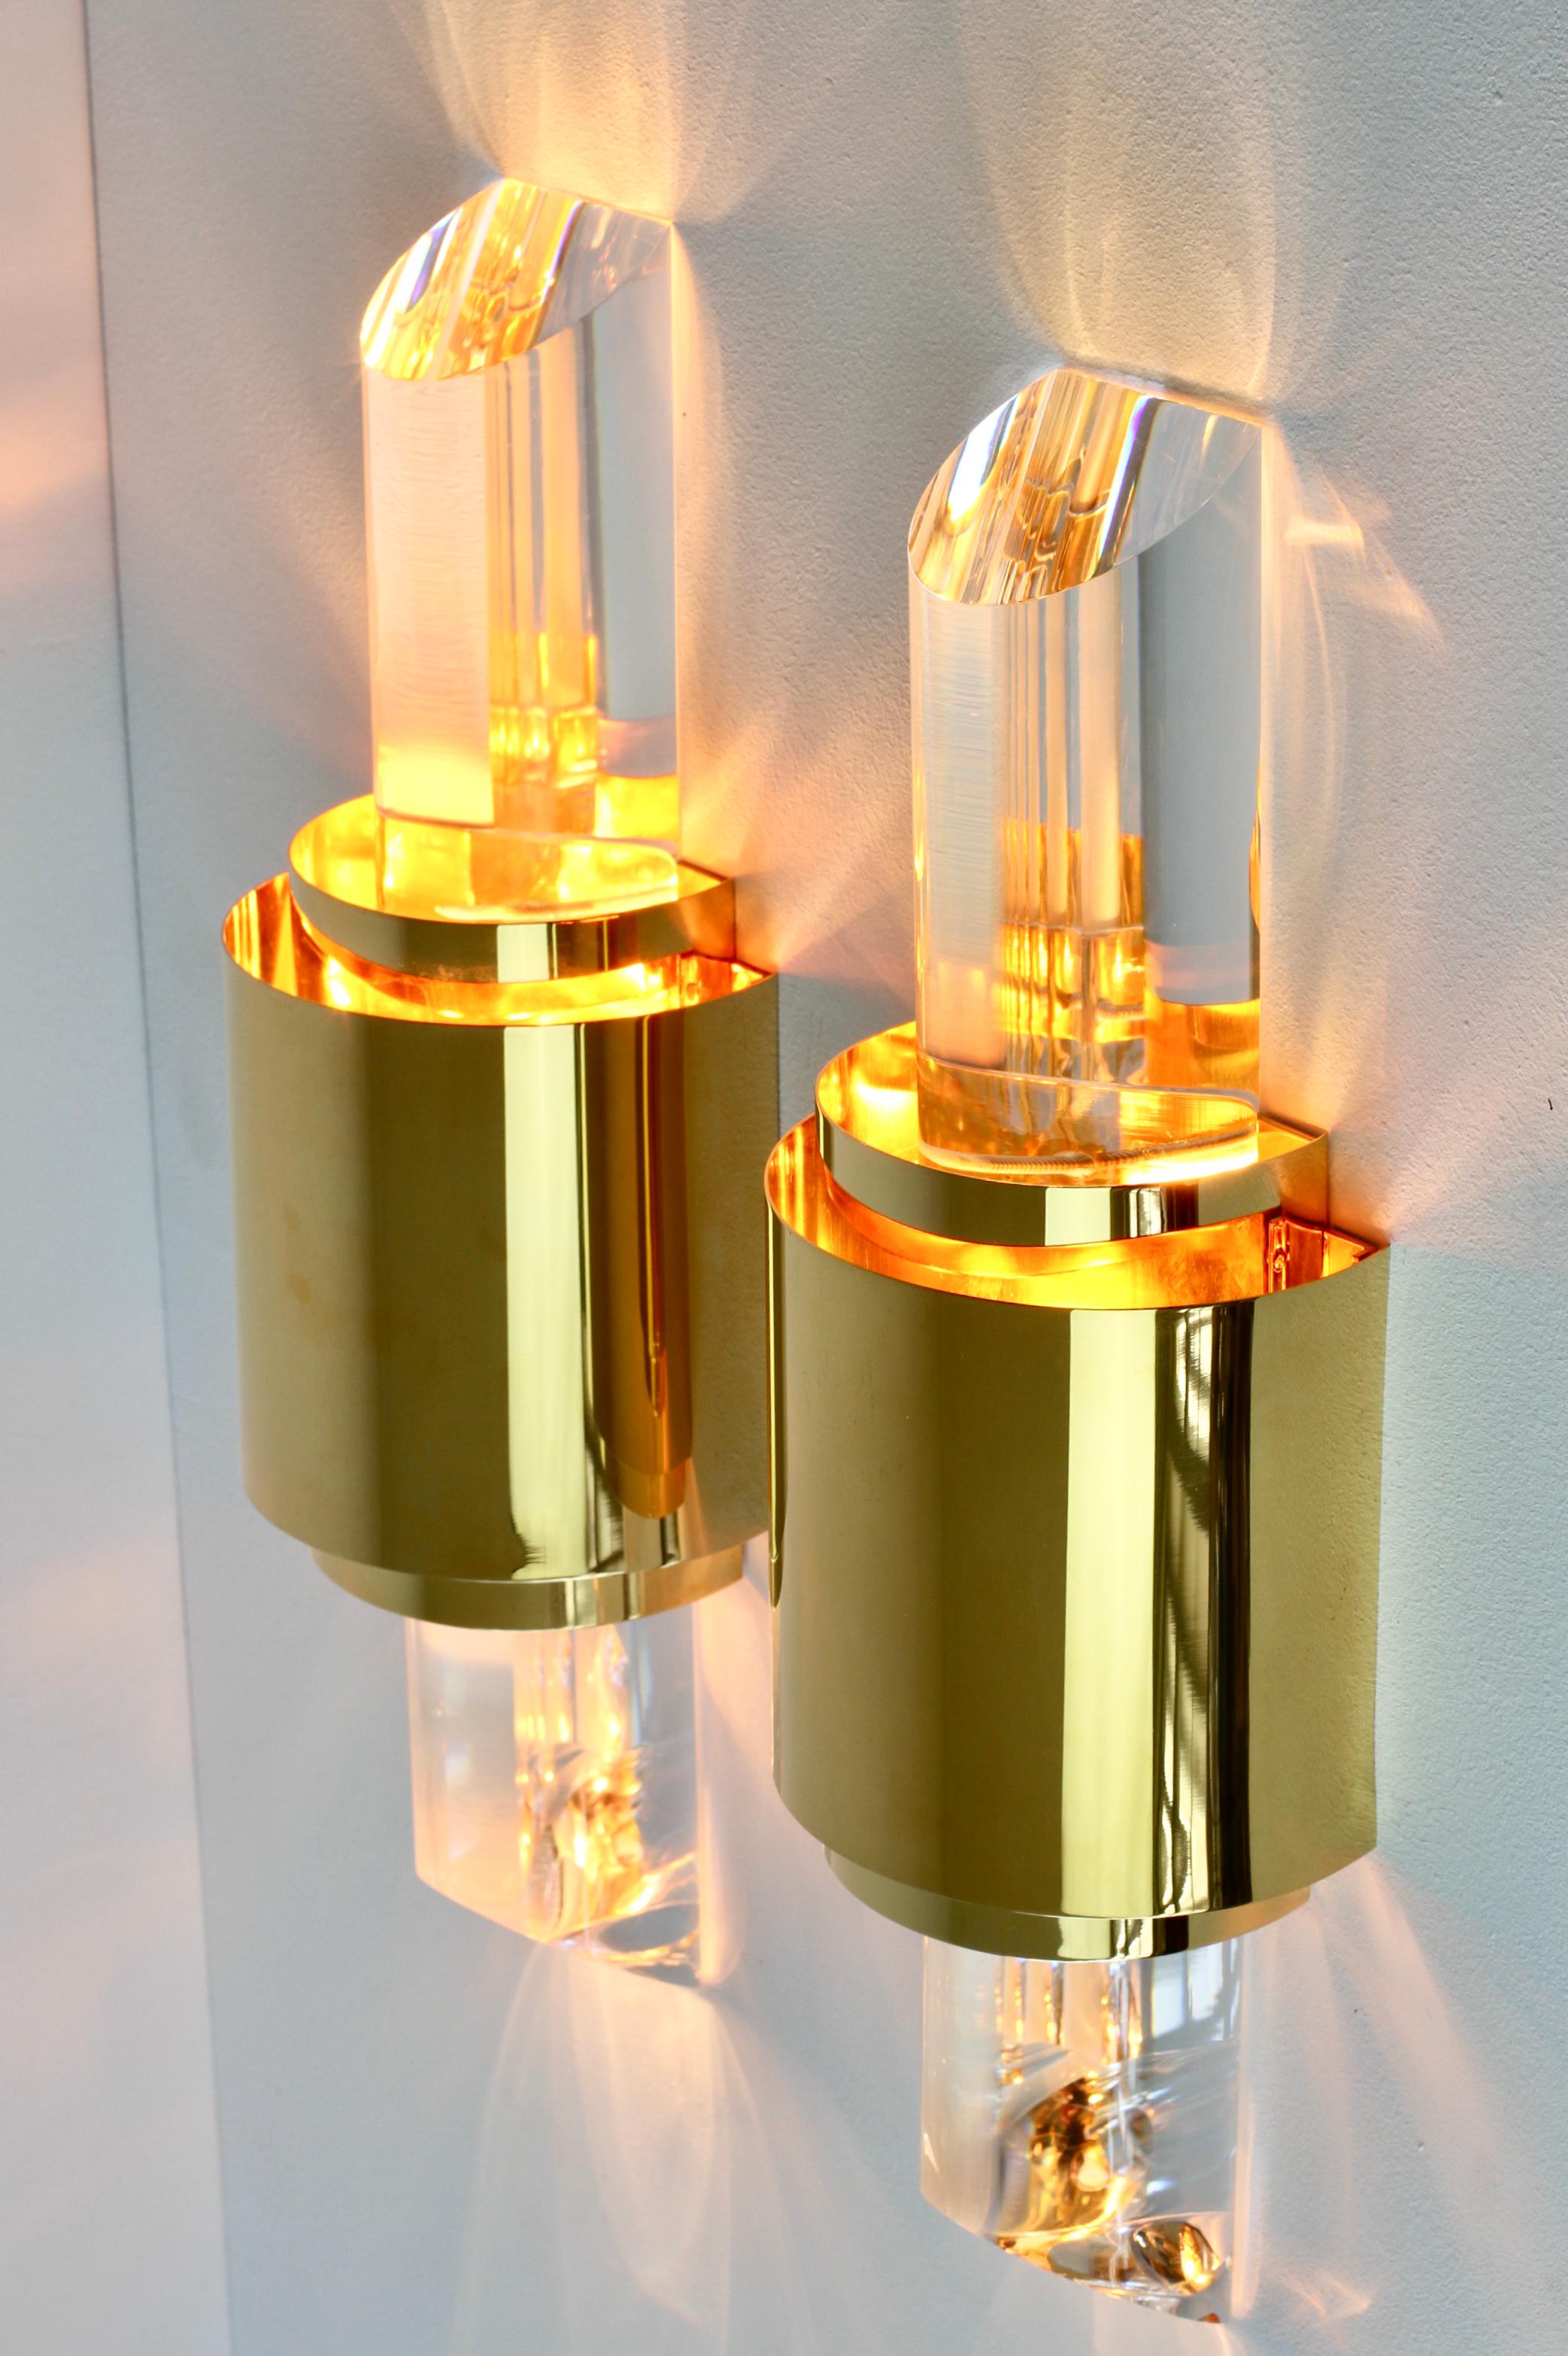 Pair of Hollywood Regency style large, cut / angled acrylic / Lucite wall-mounted lamps, lights or sconces in the style of Karl Springer and made in the latter part of the mid-20th century, circa 1975-1985. These illuminate beautifully as the light